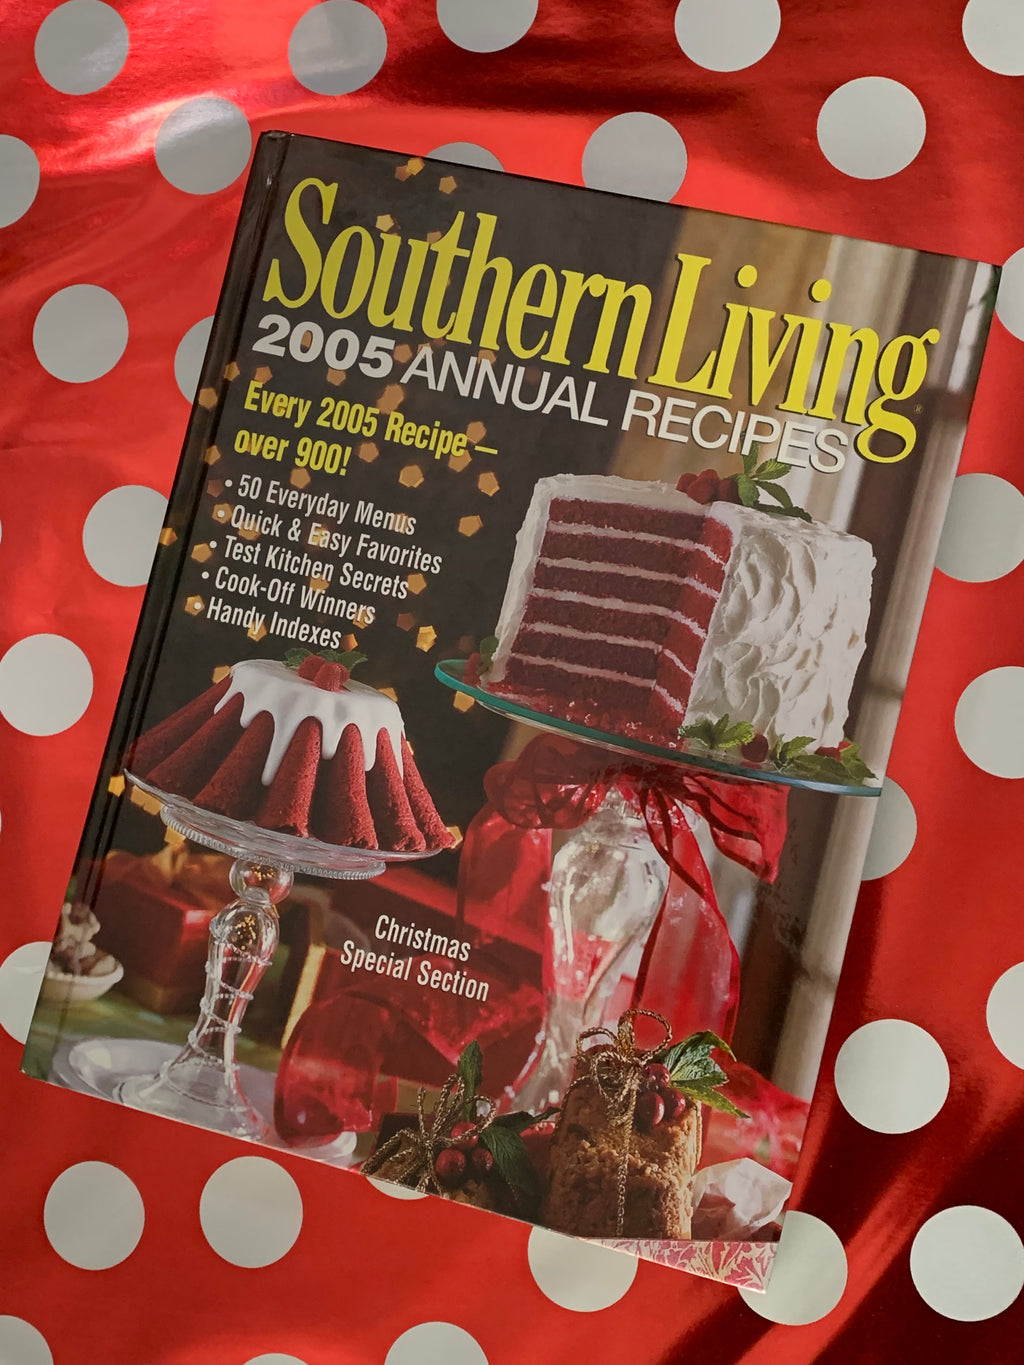 Southern Living: Annual Recipes 2005